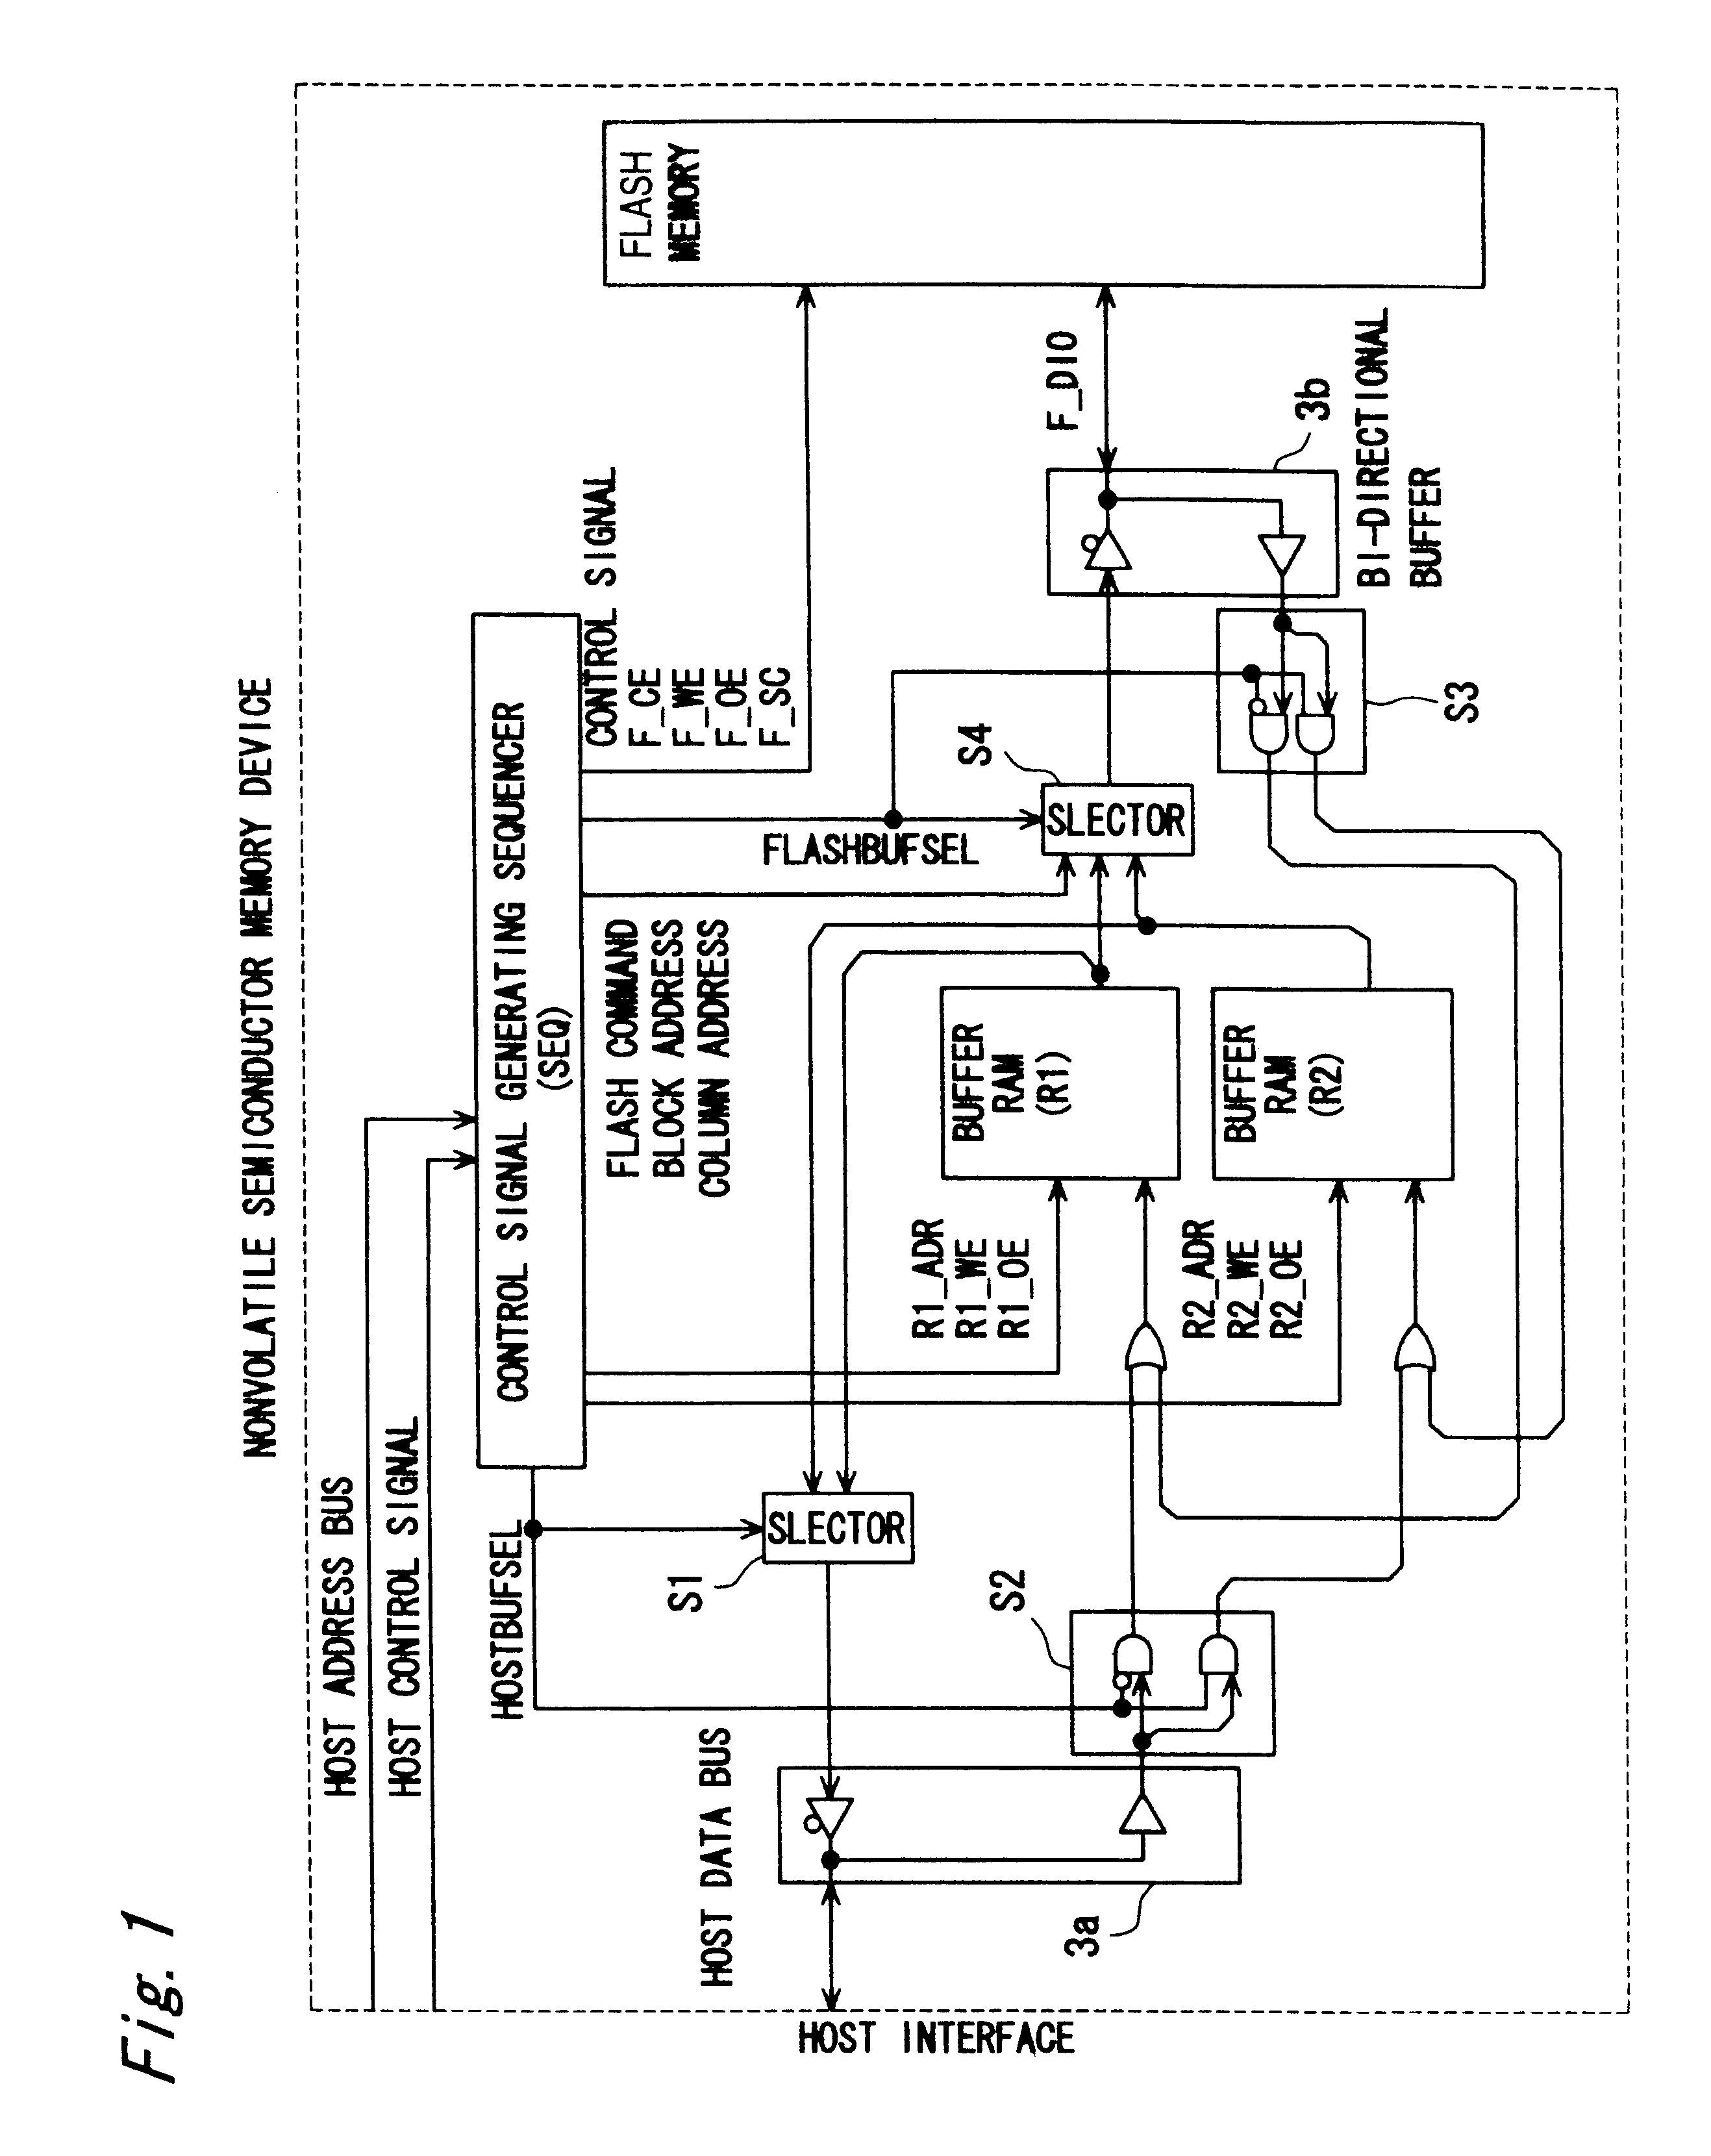 Semiconductor memory device and reading and writing method thereof